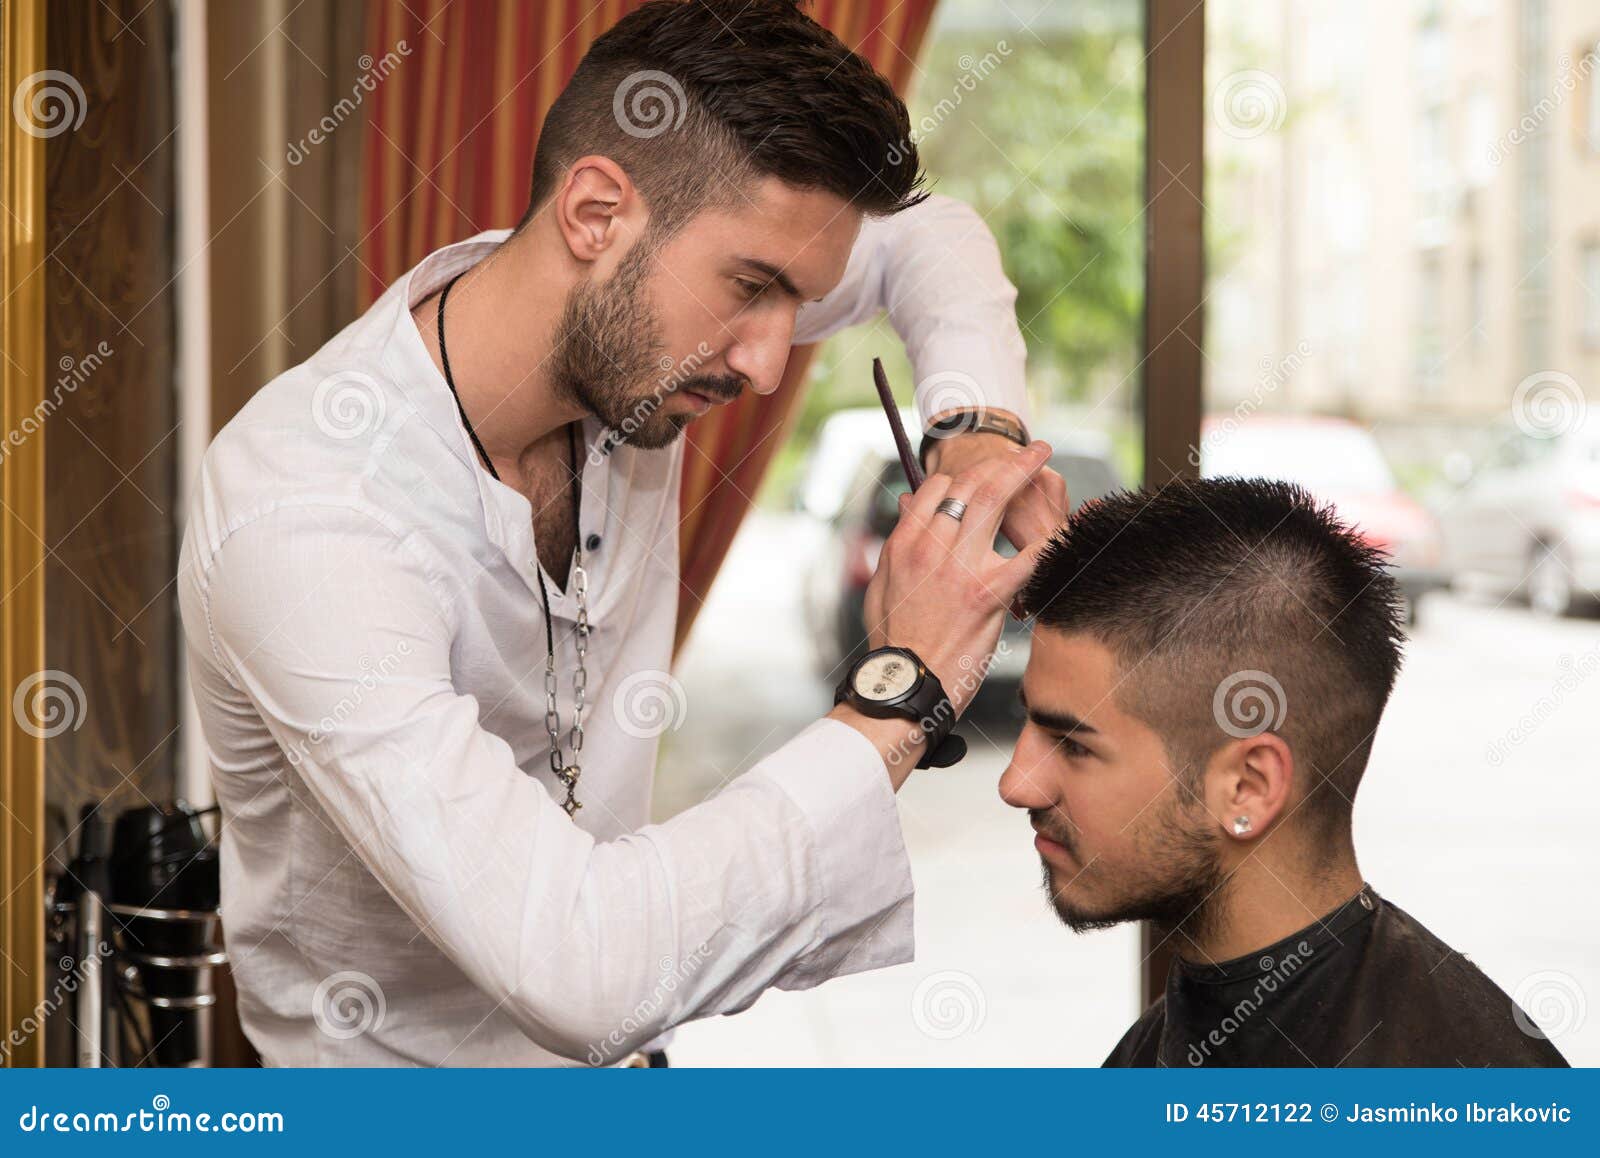 Male Hairdresser Cutting Hair Of Smiling Man Client Stock 